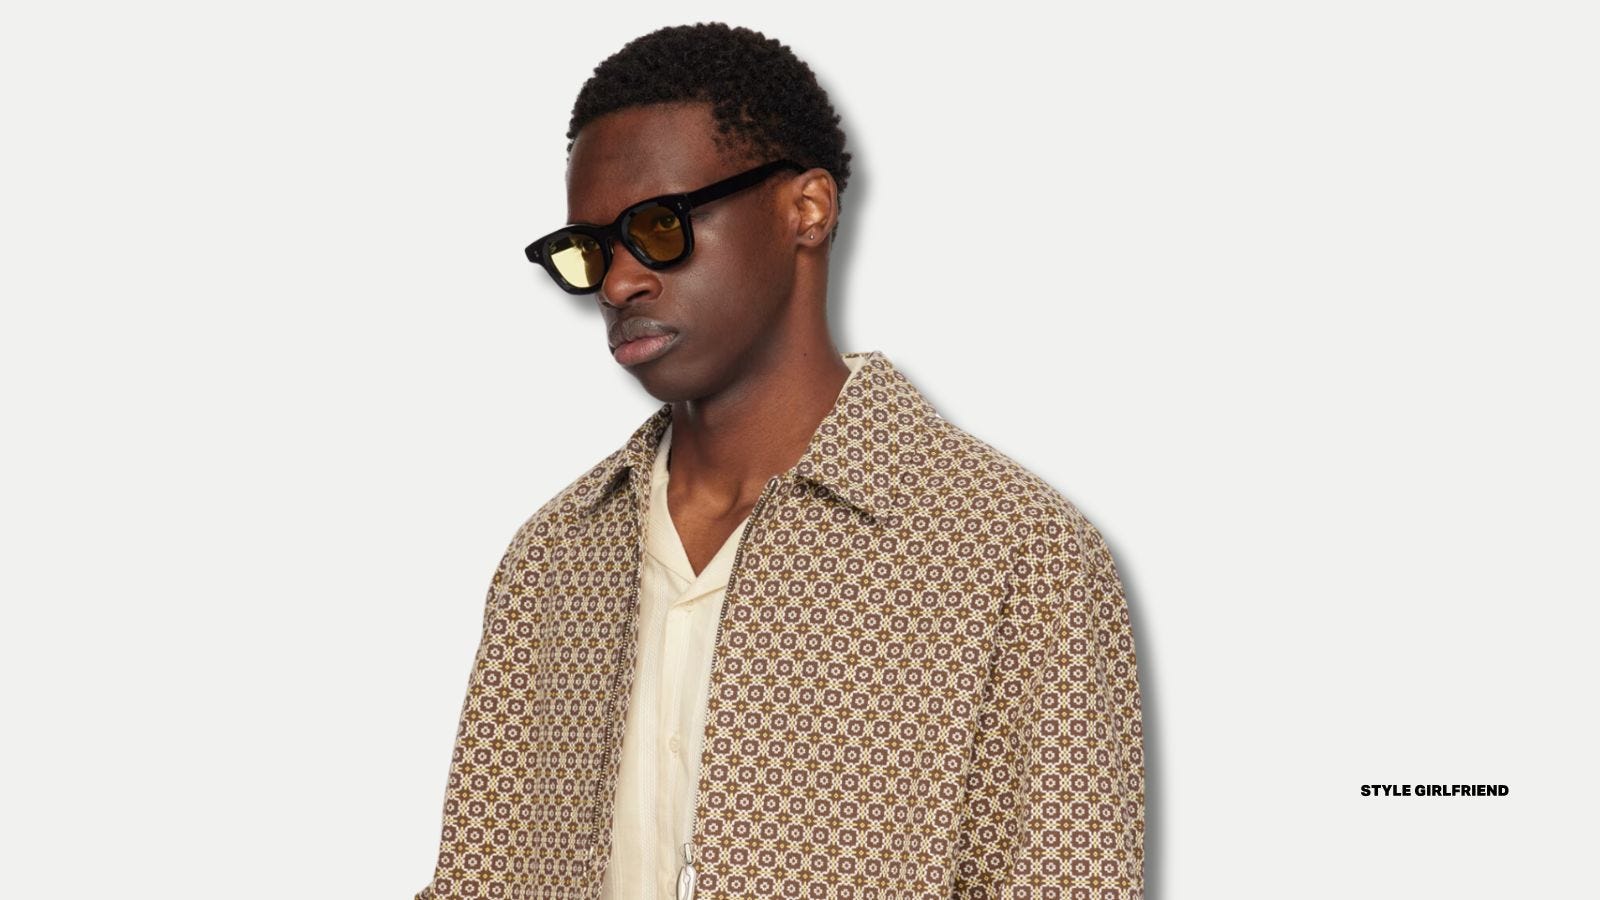 man wearing yellow lens sunglasses and a brown patterned coat over a v-neck shirt